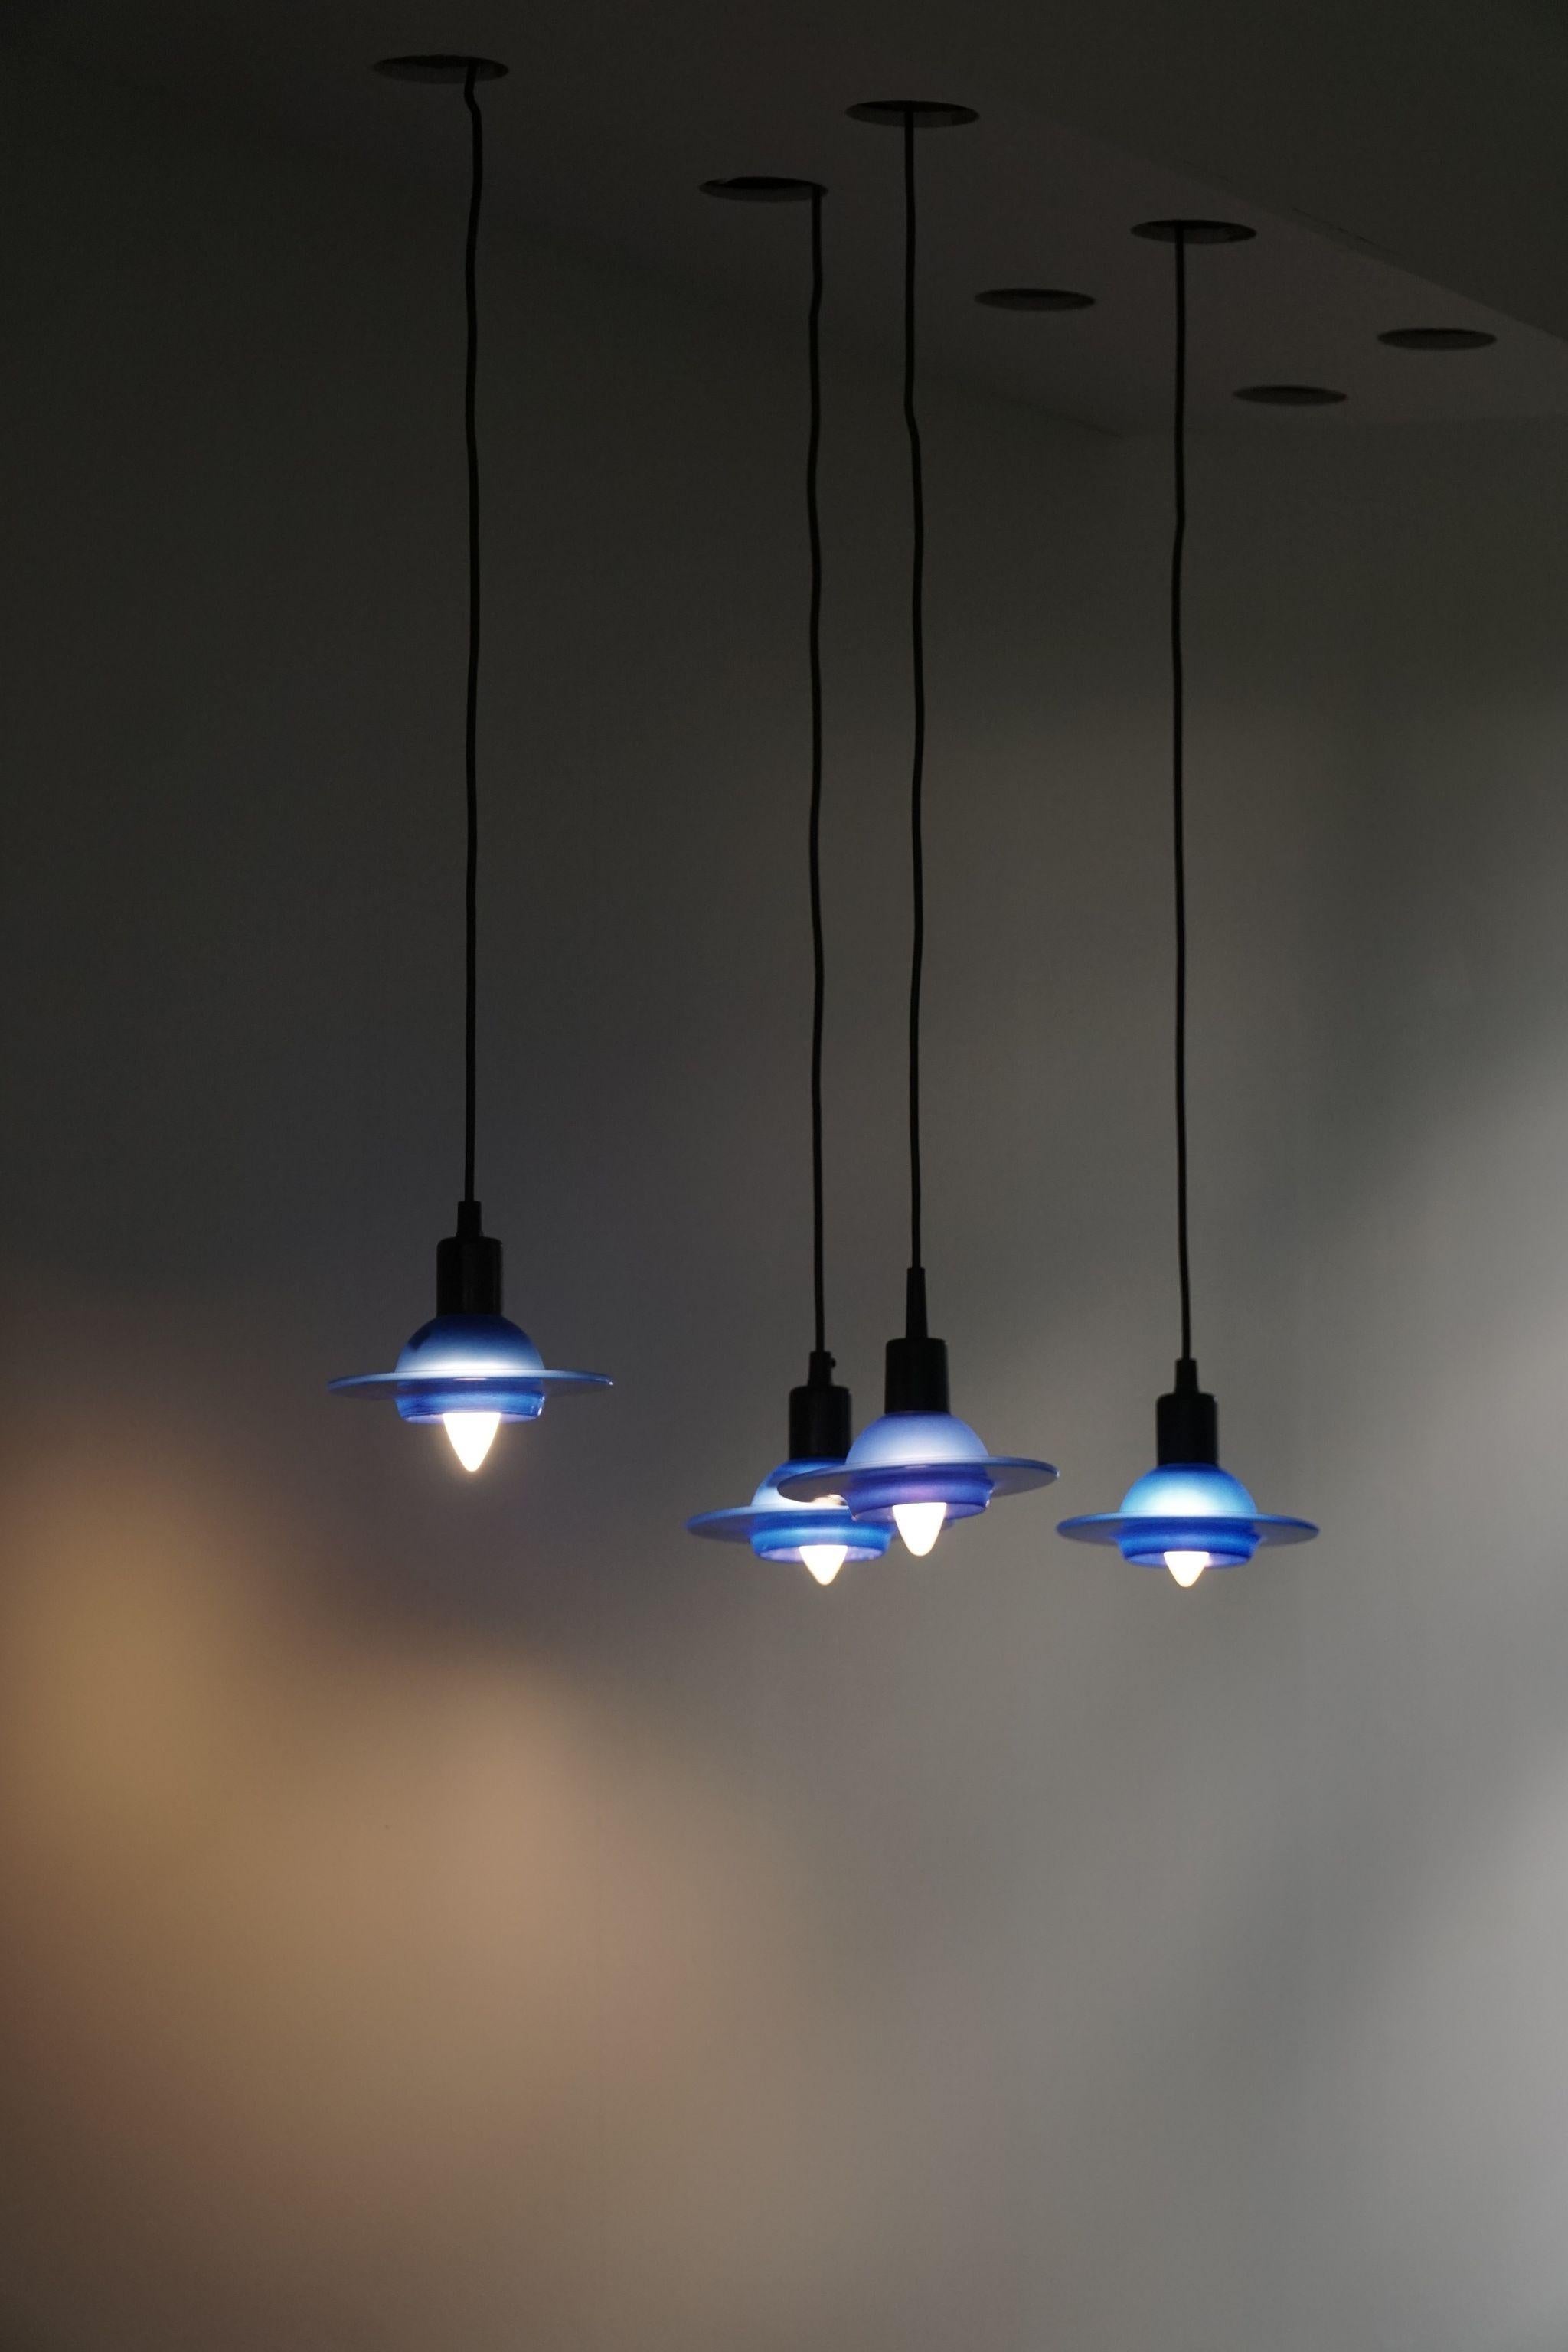 Set of 4 vintage glass lights in blue glass. Made by Design Light A/S, Denmark, in the 90s. These have gone out of production today. A cosy light, perfect for a kitchen, a comfortable corner or a set over the dining table.

The overall impression